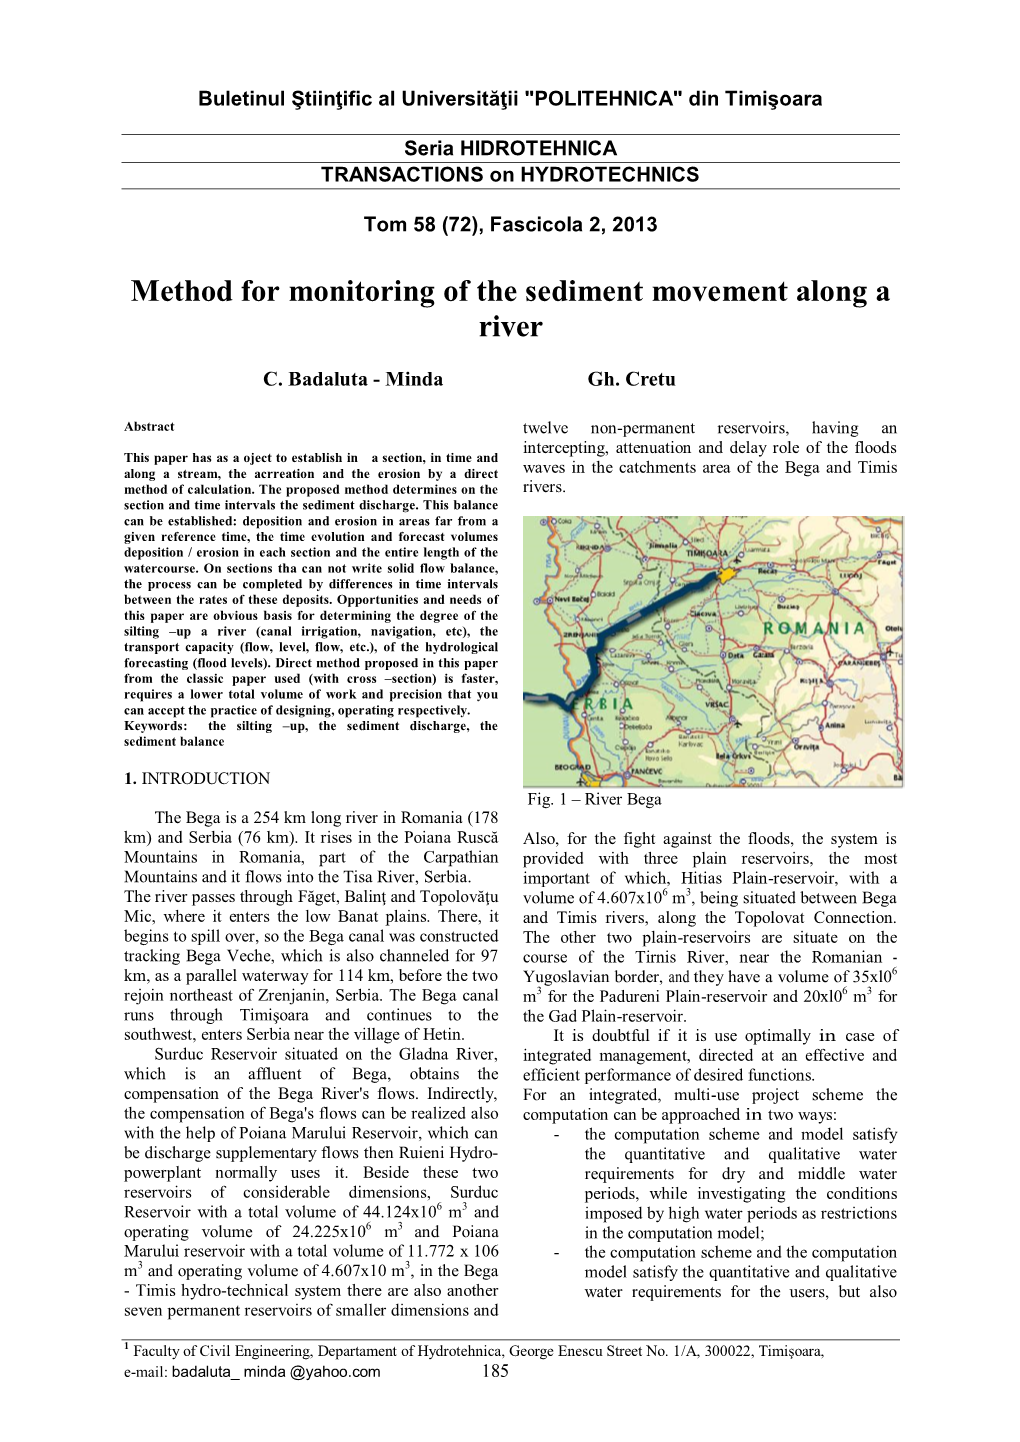 Method for Monitoring of the Sediment Movement Along a River